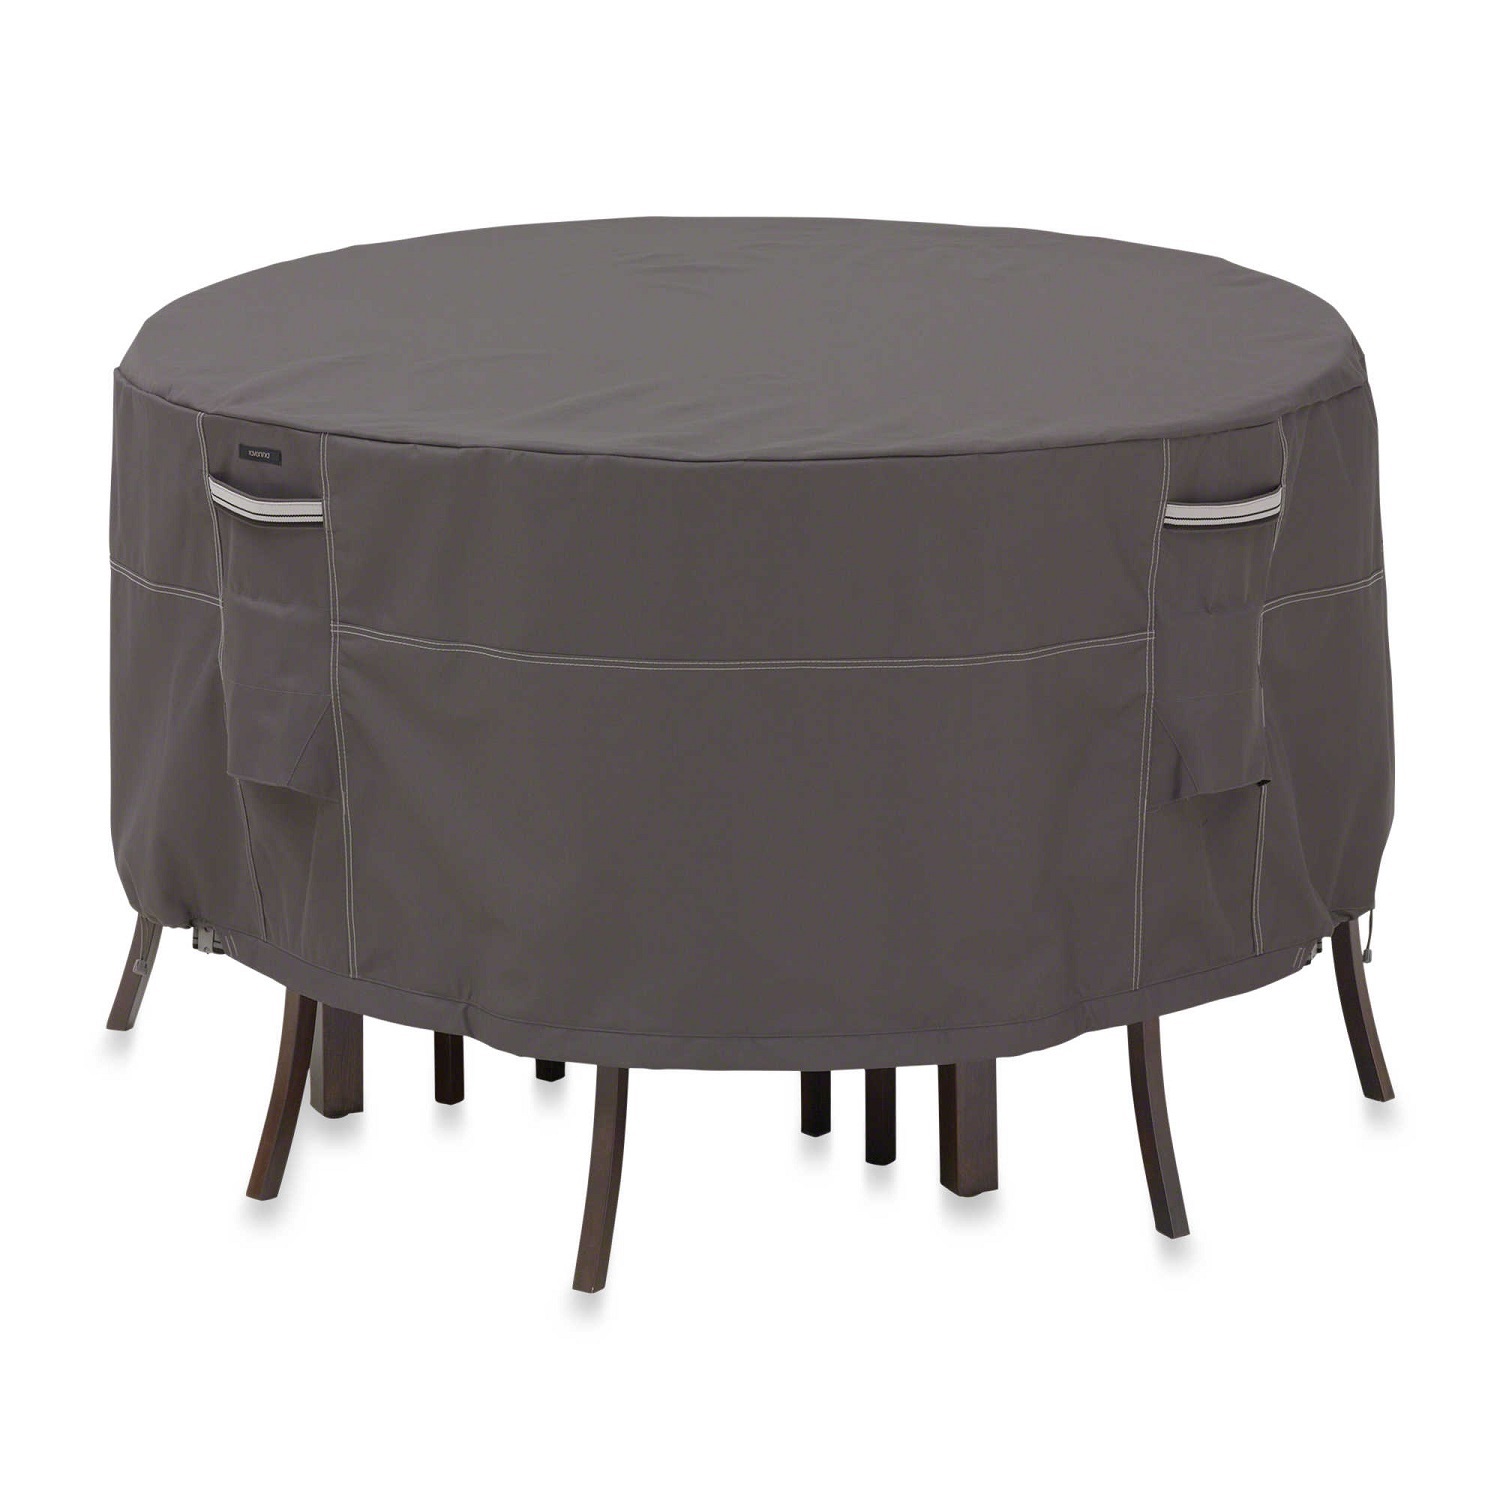 Classic Accessories Ravenna Patio Table & Chair Set Cover-Rectangle\/Oval Medium